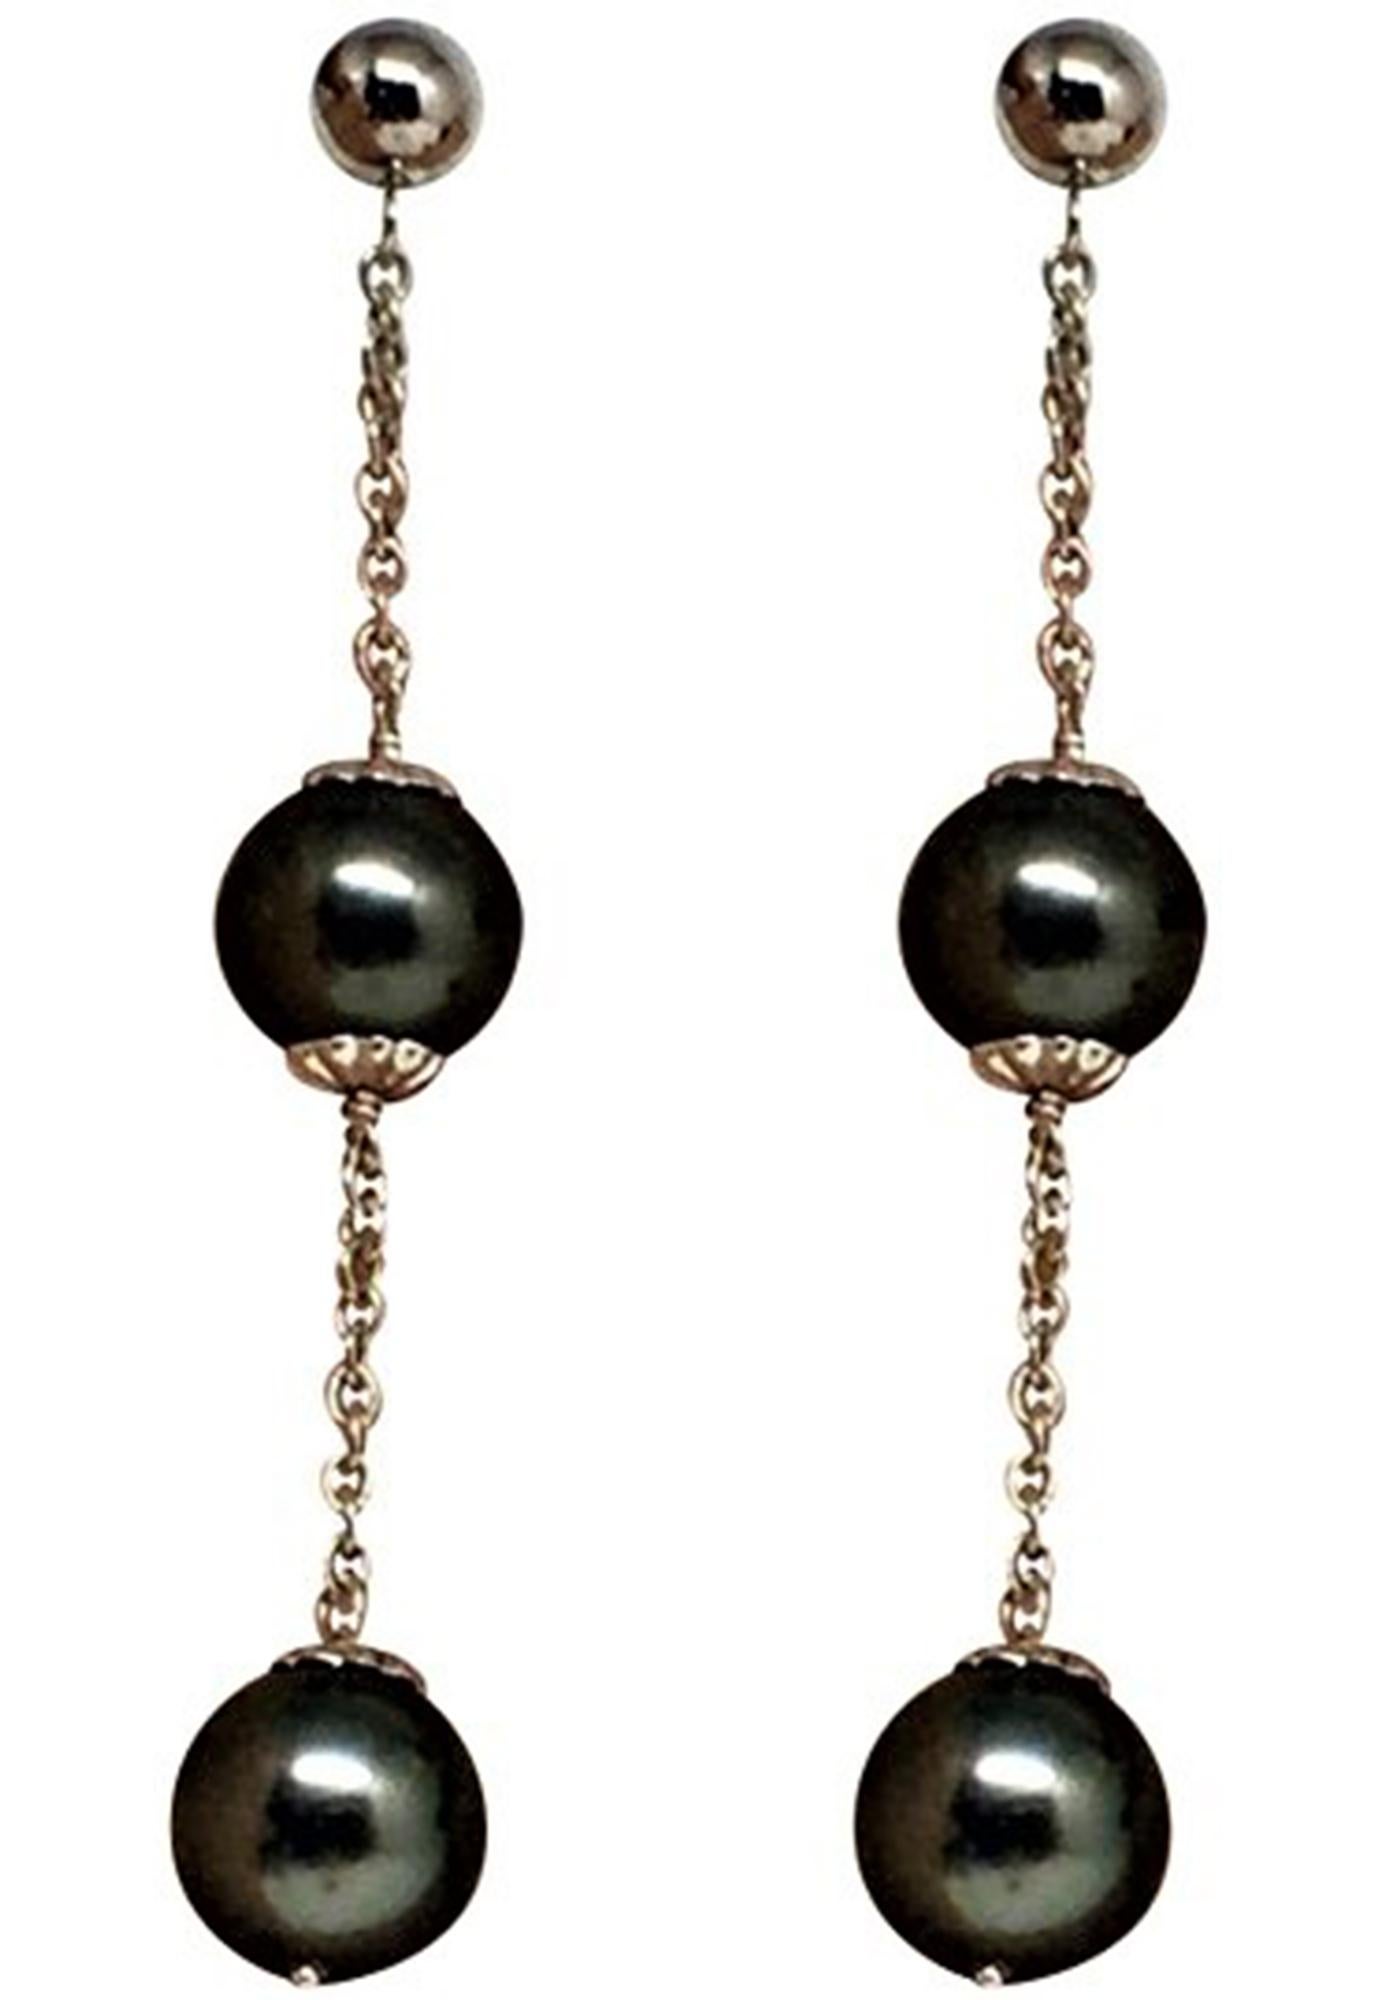 Certificate#201815384 
Fine Tahitian Pearl 14 Kt Large 8.8 mm Earrings Certified $1,290 815384 

This is a Certified Authentic Fine Quality Diamond and LARGE 8.8-8.5 MM Tahitian Saltwater Pearl 14KT Solid Gold Earrings with a total weight of 4.443